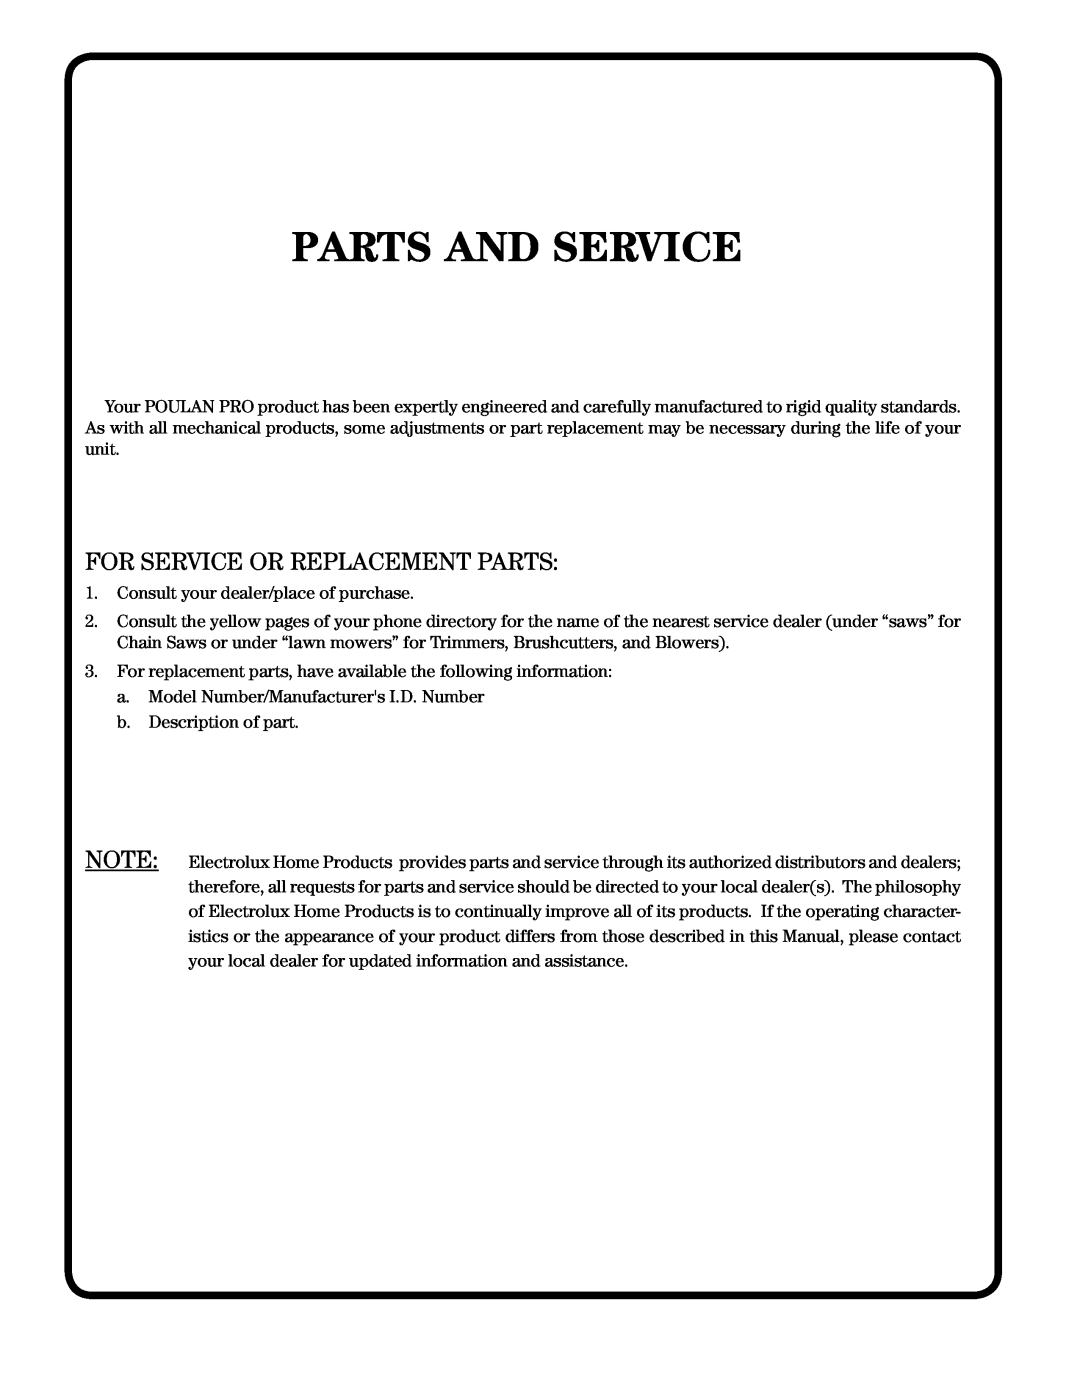 Poulan PDGT26H48B owner manual Parts And Service, For Service Or Replacement Parts 